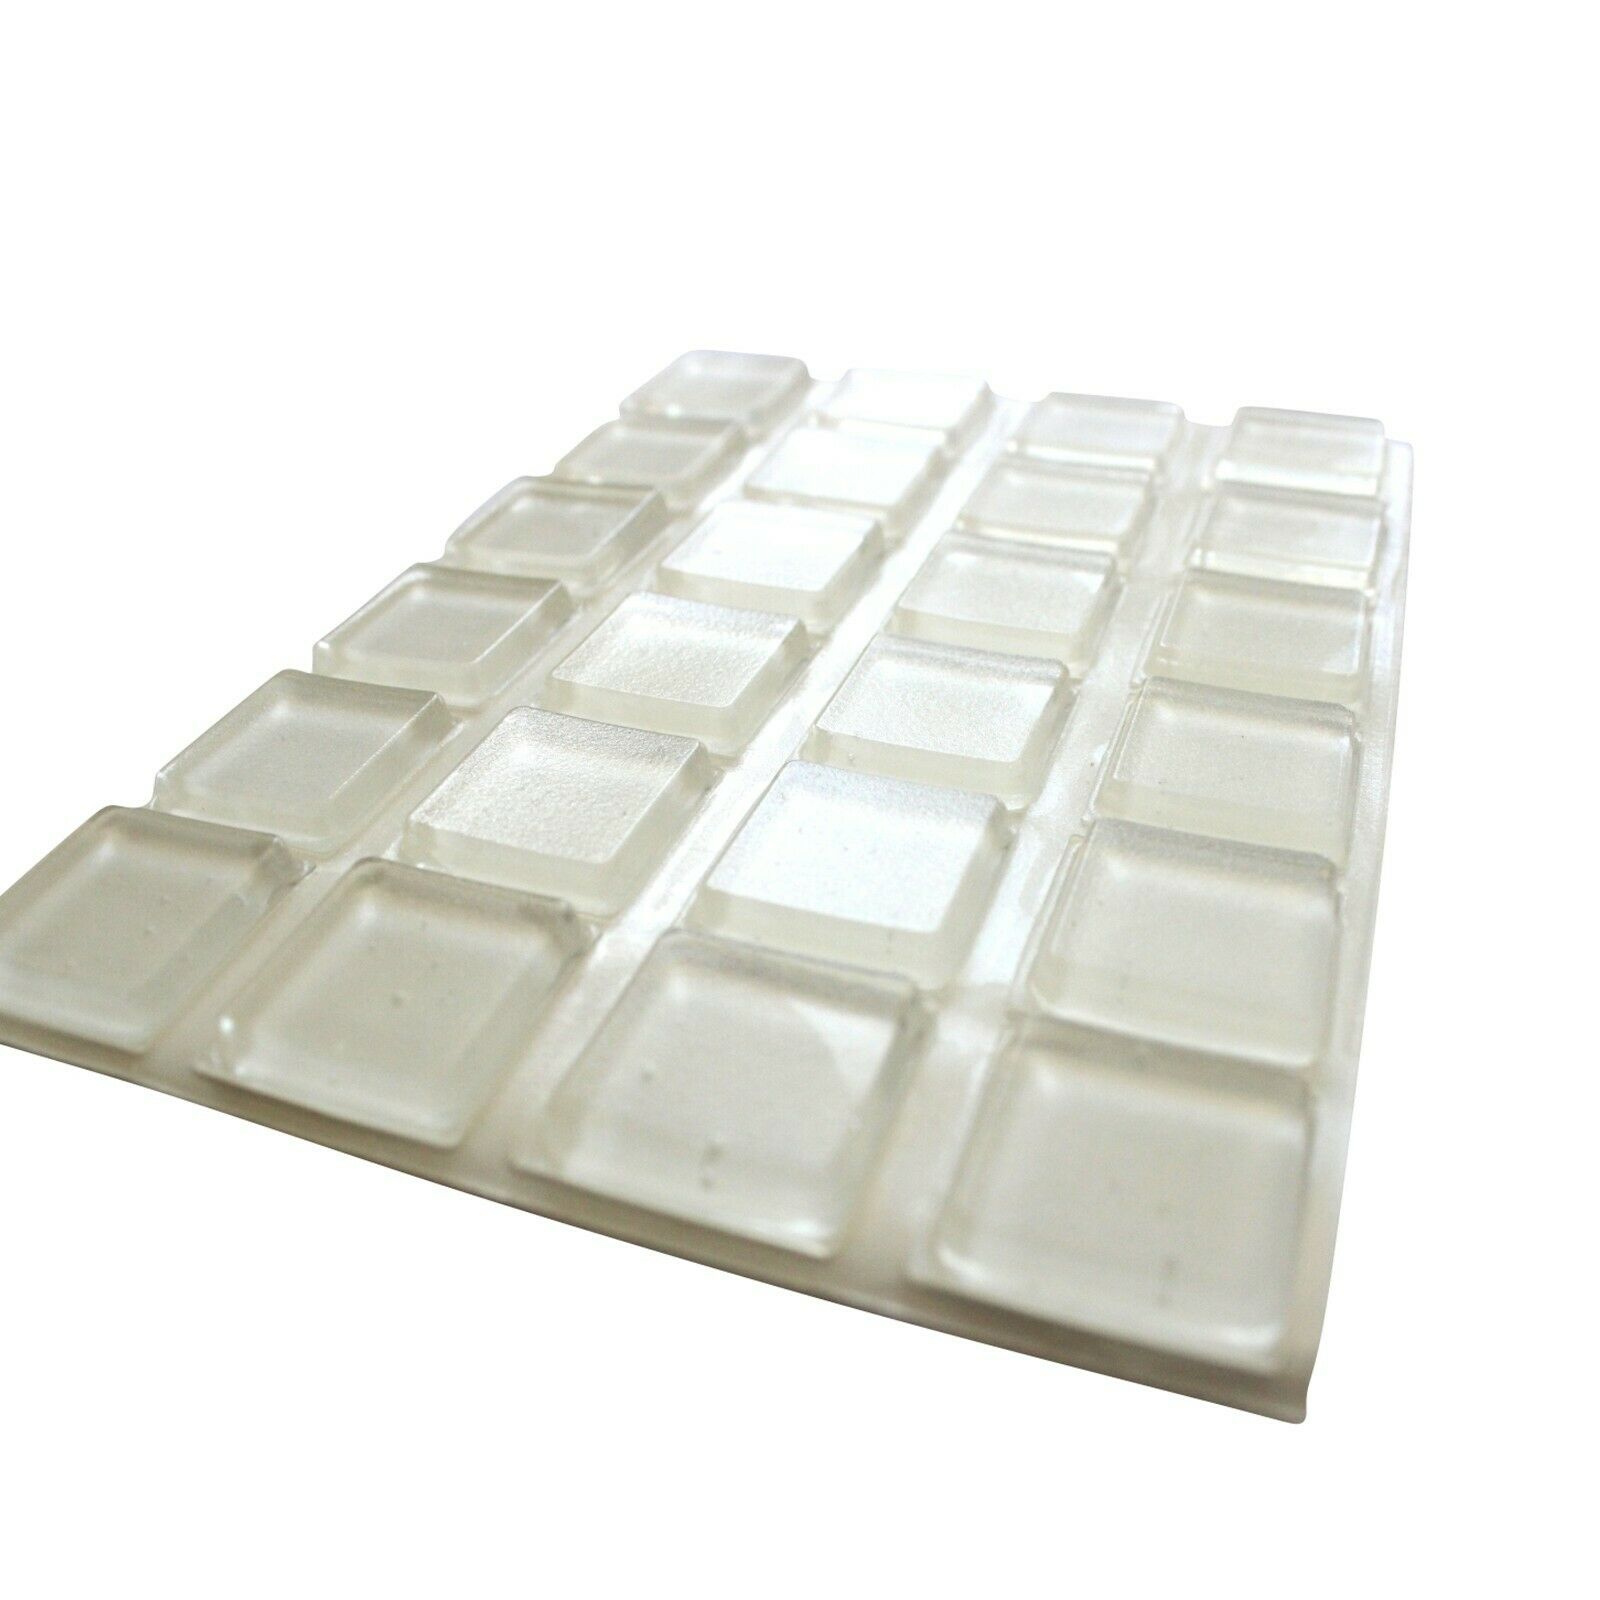 10 Pack Self-Adhesive Rubber Feet Large Clear Glass Square Bumpers 1.0